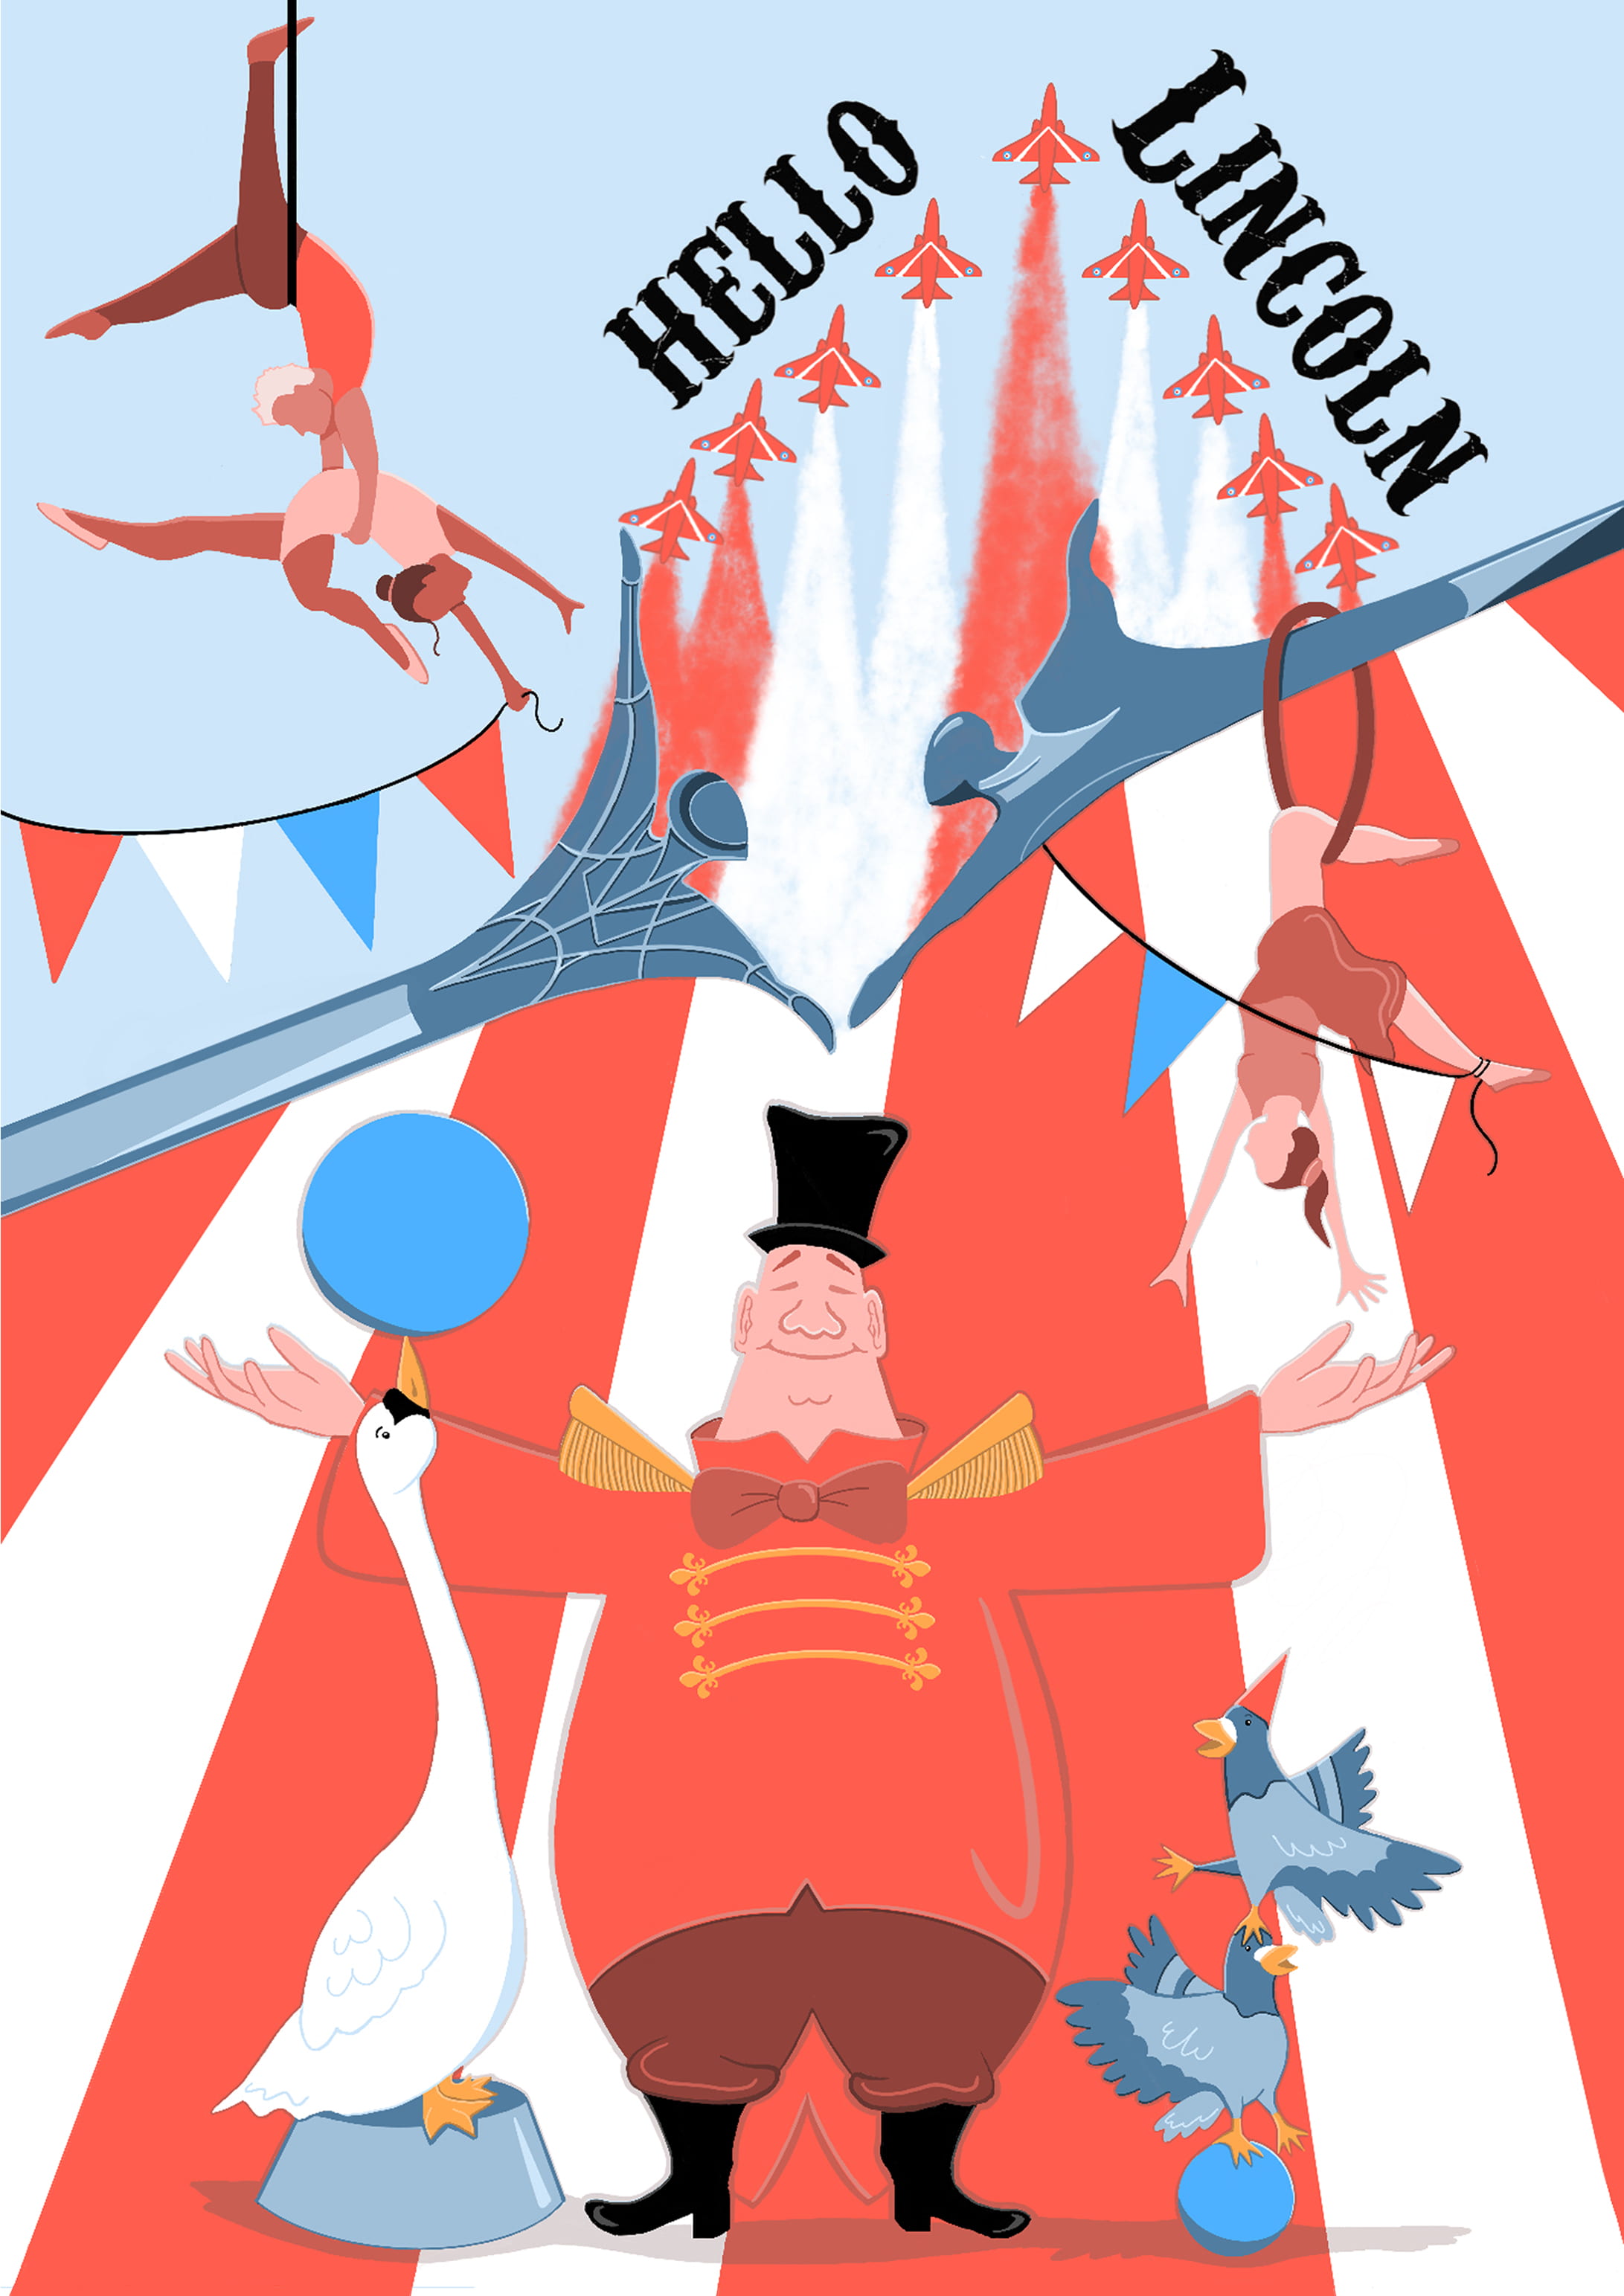 An illustration, a circus ringmaster, accompanied by trapeze artists, a swan balancing a ball, and red arrow jets leaving red and white coloured smoke, text reads: 'Hello Lincoln'.